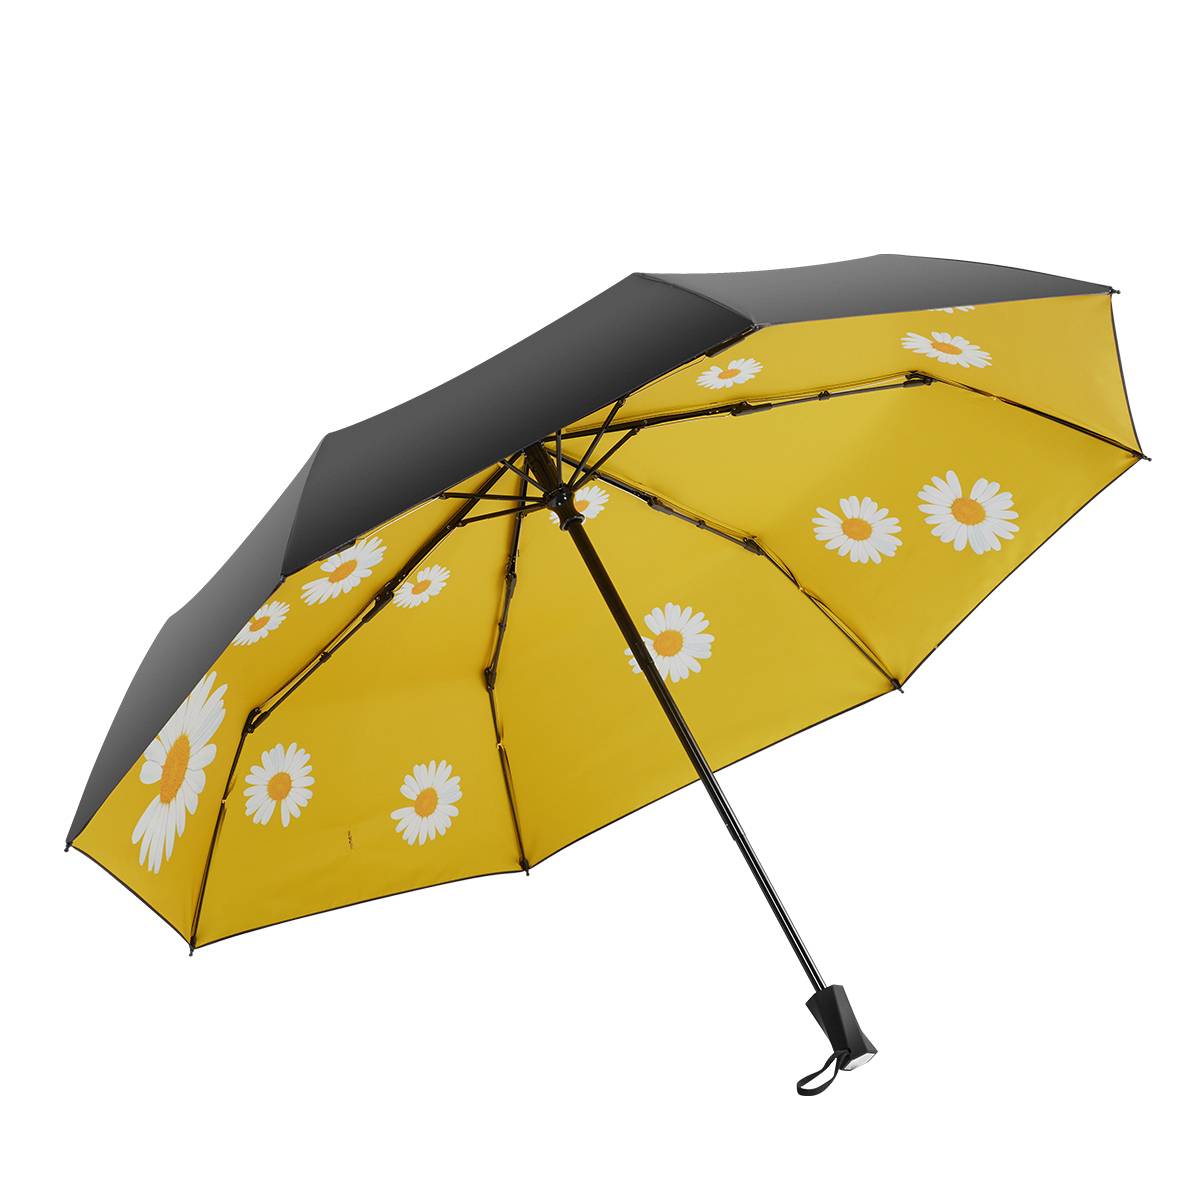 OEM Factory for Portable Led Umbrella Light - 21 inch 8 ribs manual open unique handle design with daisy flower 3 fold umbrella – DongFangZhanXin